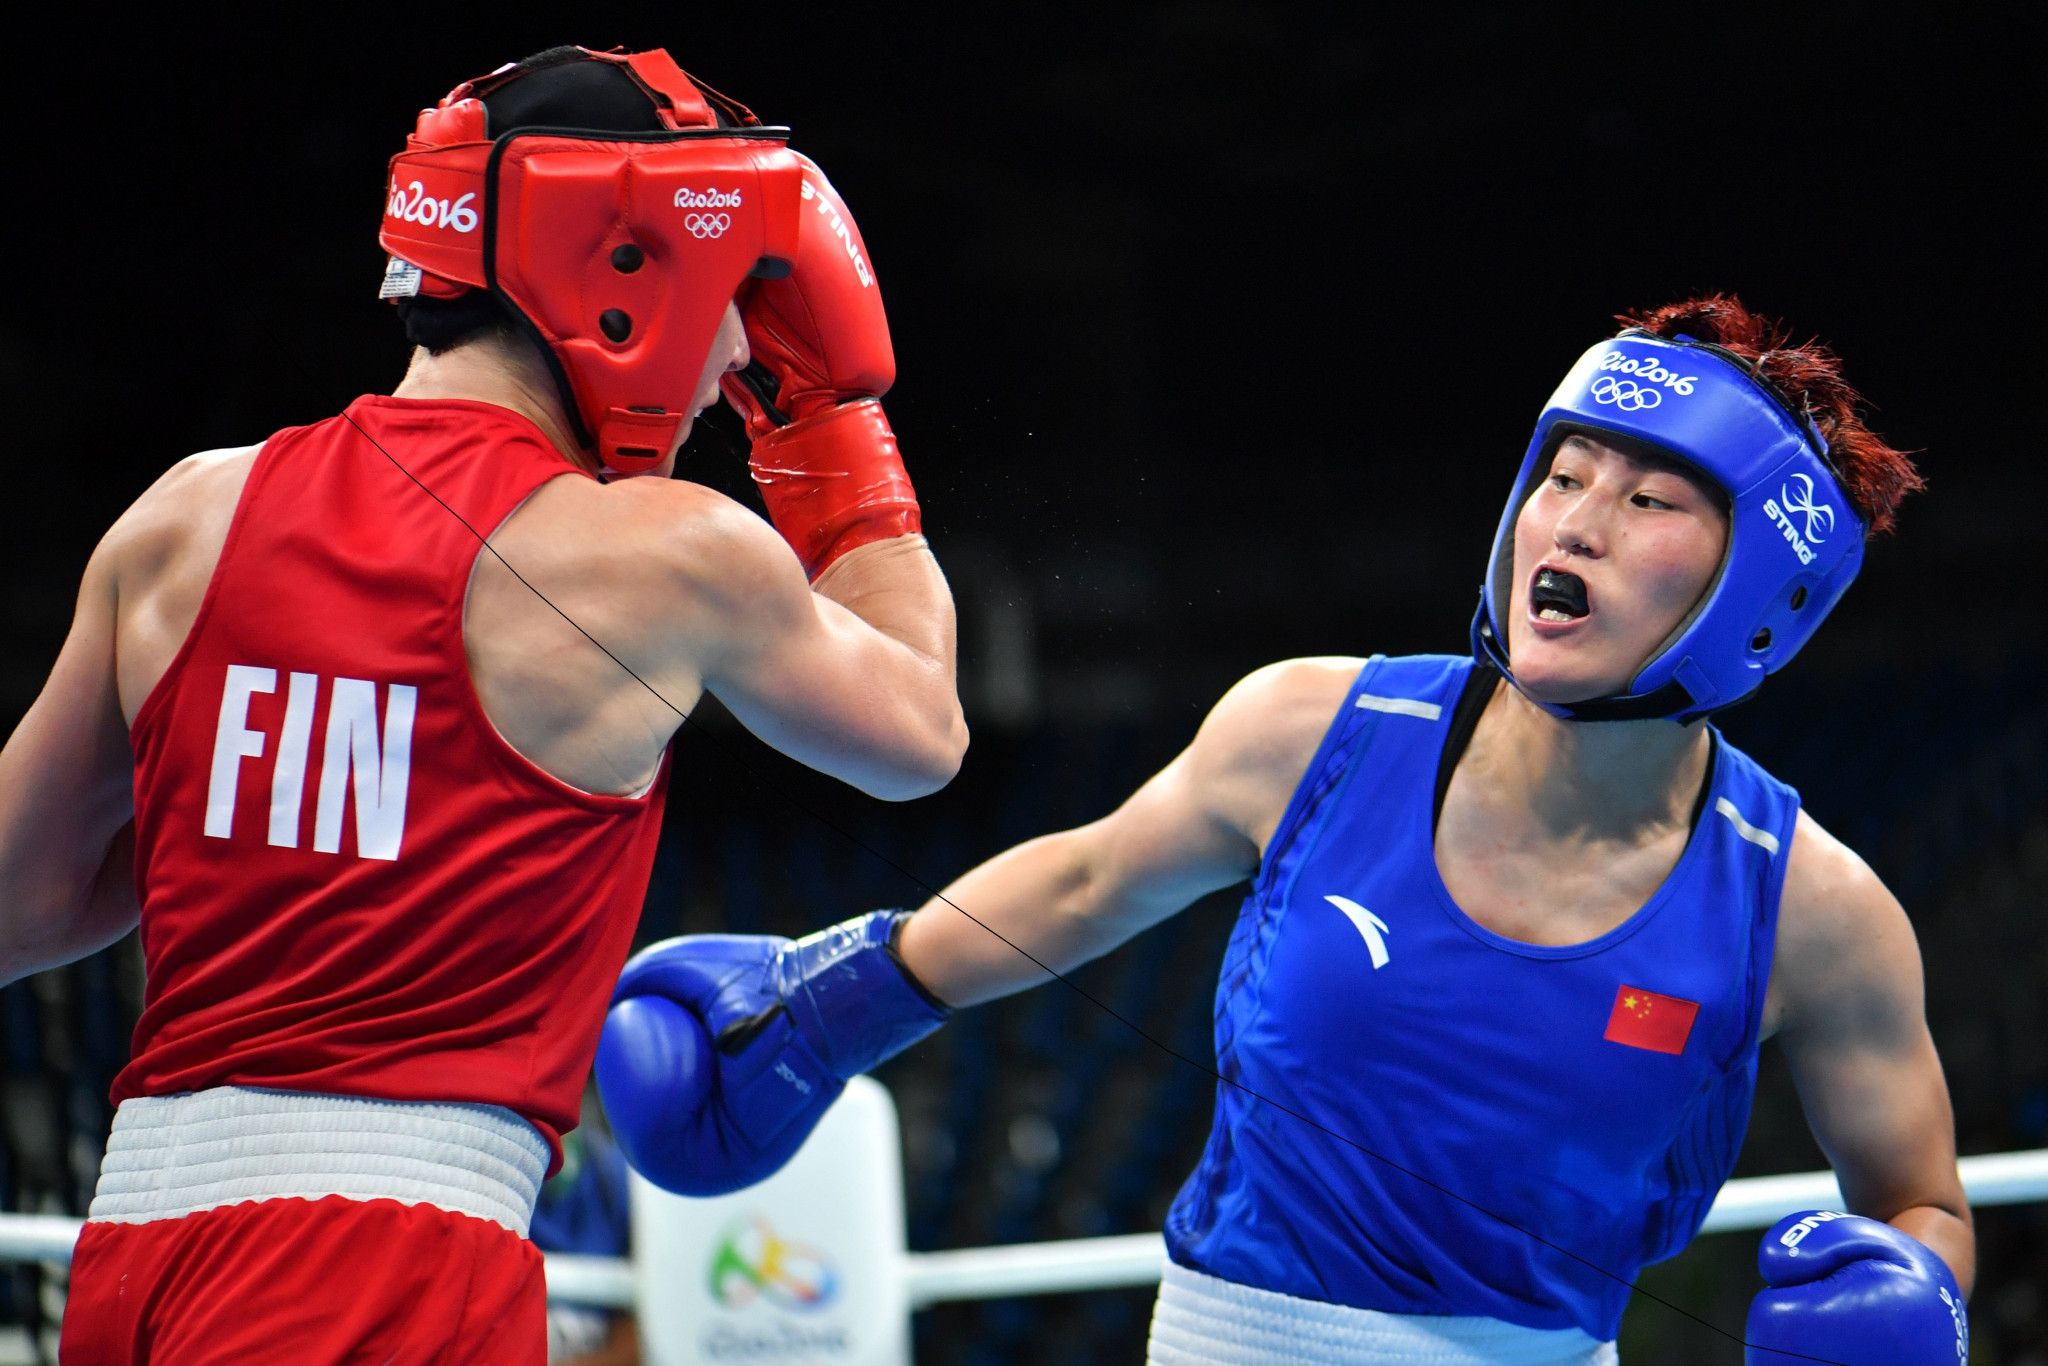 China's Yin Junhua is due to begin her featherweight campaign tomorrow ©Getty Images